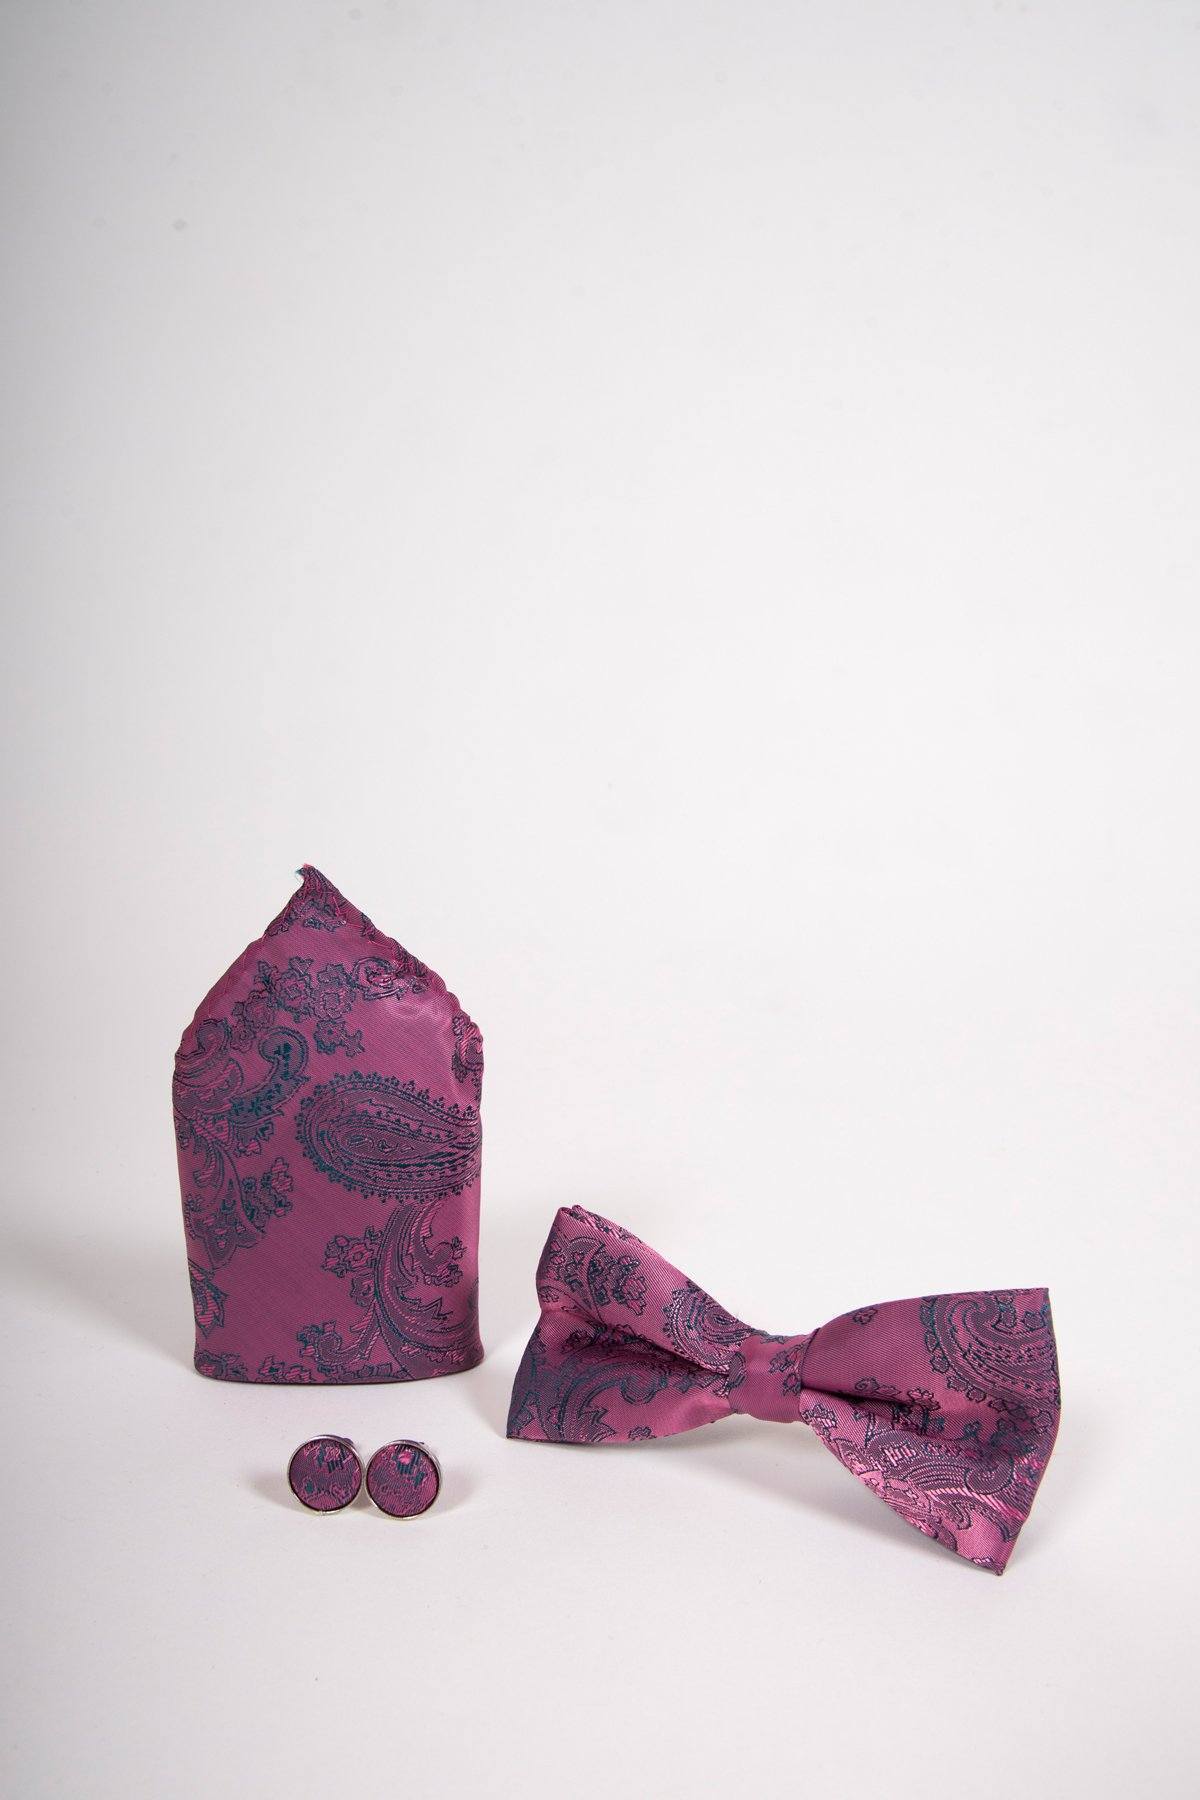 Pink paisley Bow Tie Set-Bow tie, pocket square, Cufflinks.